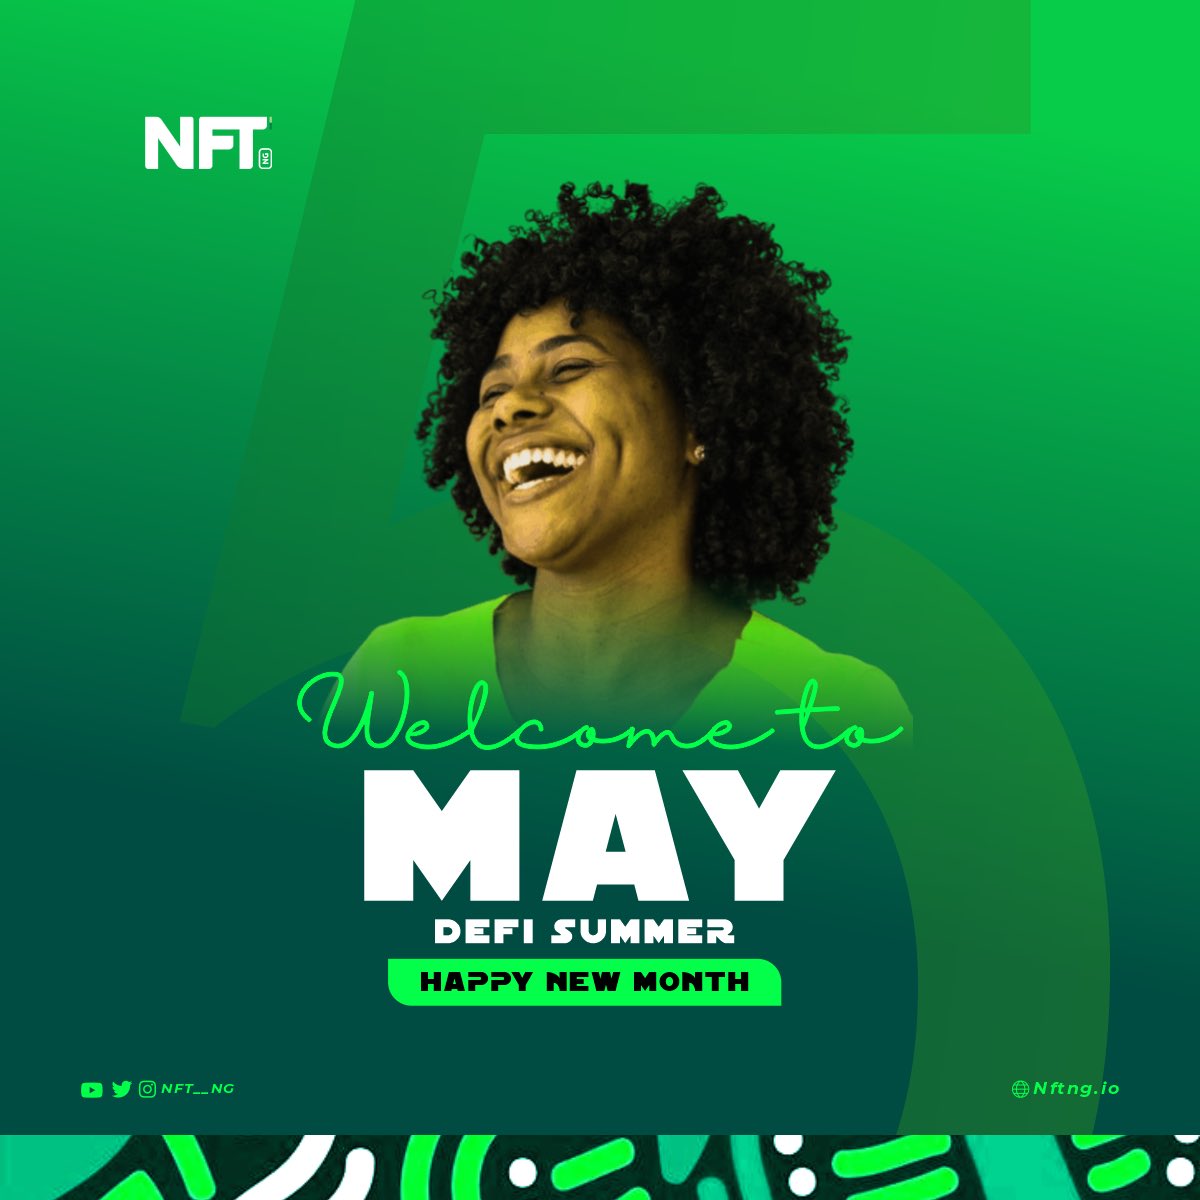 It's a new month and we're excited to enter the final lap with you. We can't wait to show you that we've been working on. Welcome to May.